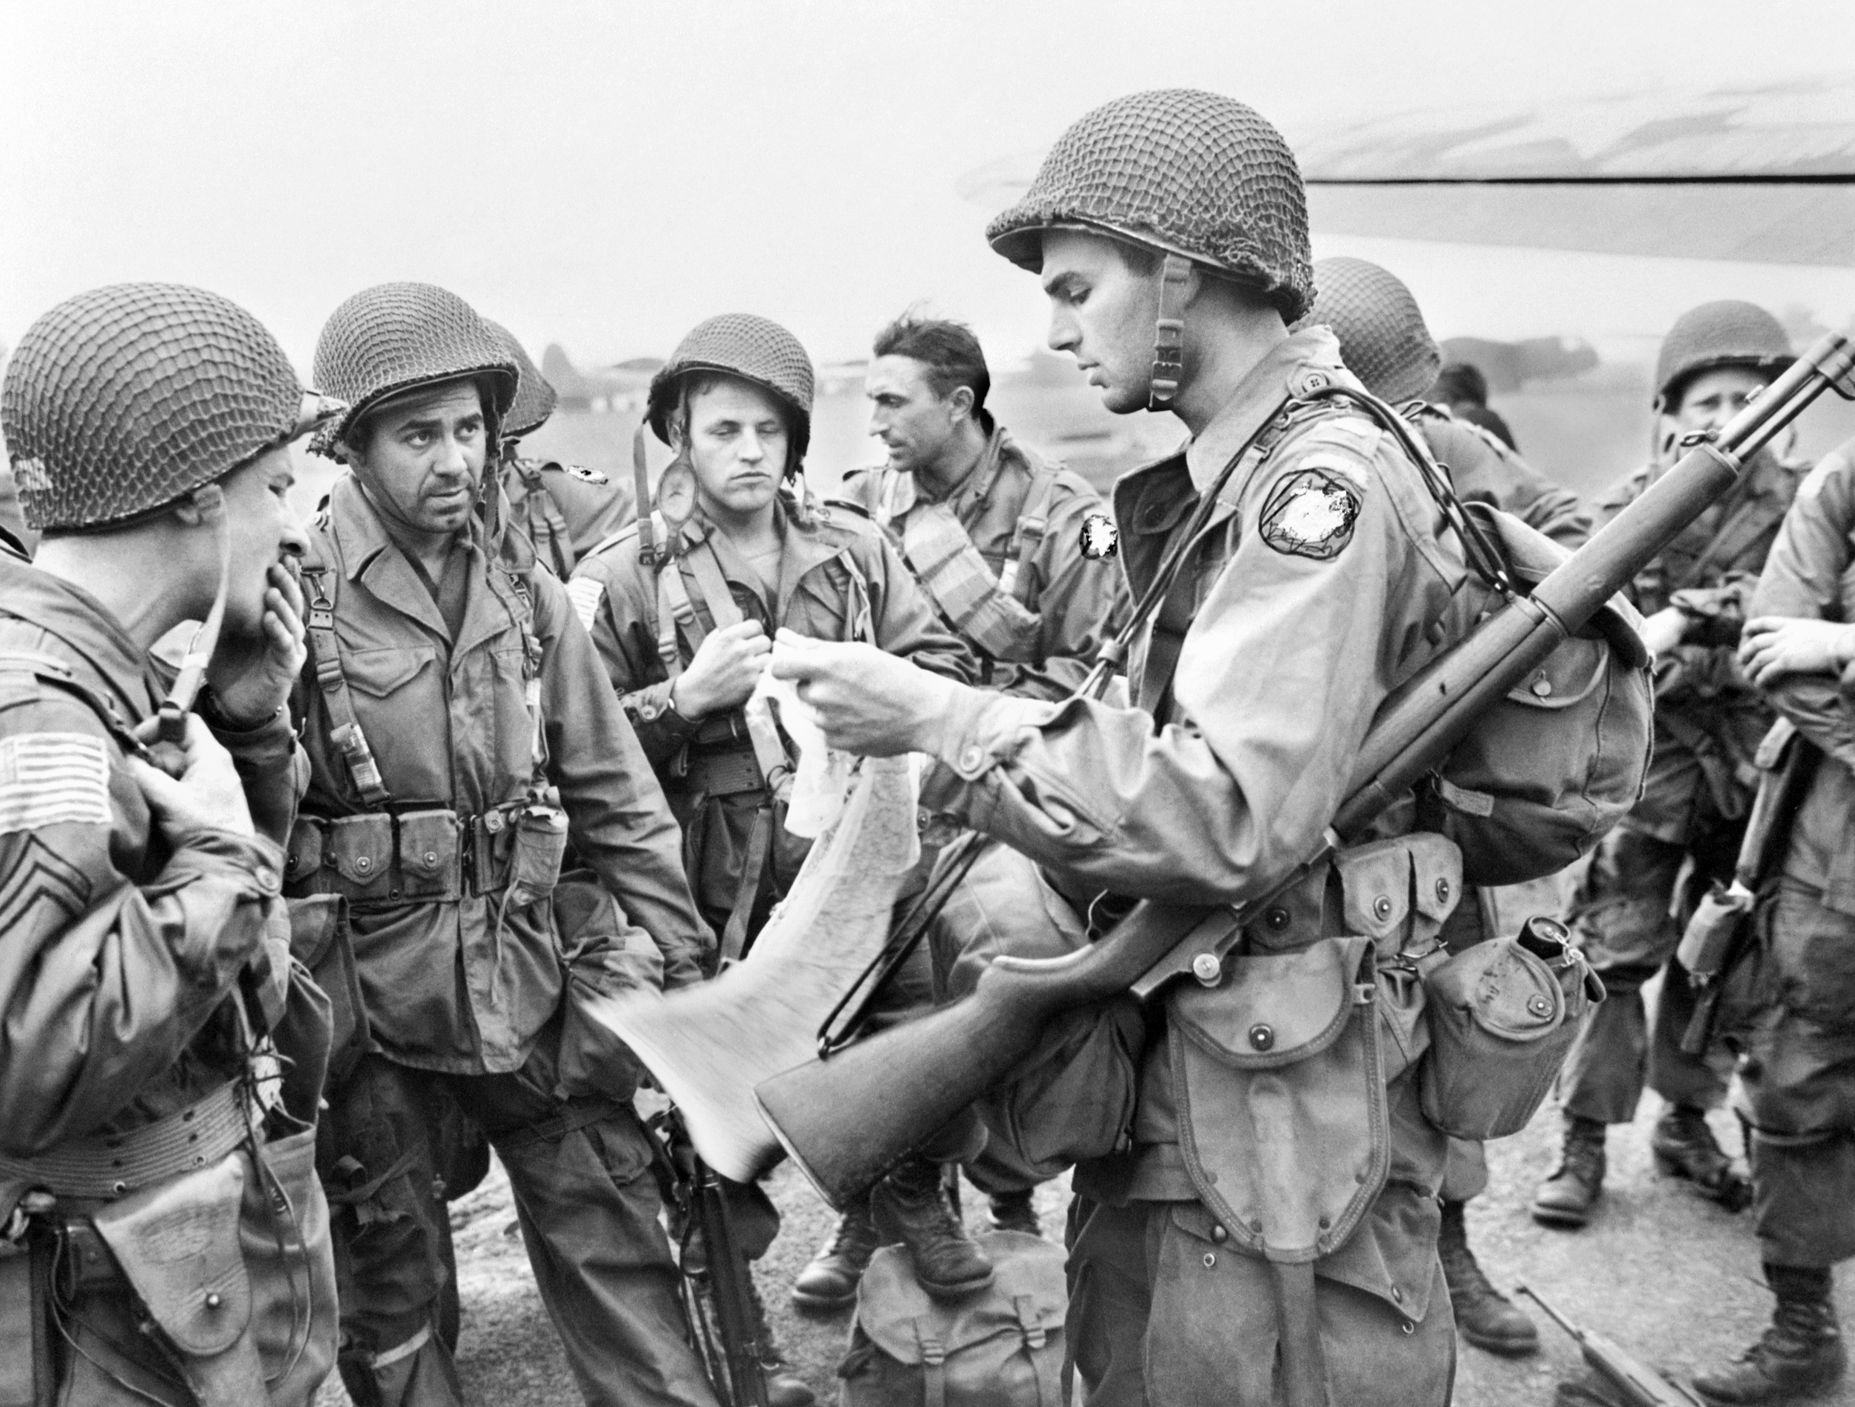 American airborne soldiers receive a last-minute briefing before embarking in the early hours of Operation Market-Garden. The U.S. 82nd and 101st Airborne Divisions participated in the airborne phase, linking up with the British 30th Corps once they were on the ground. 